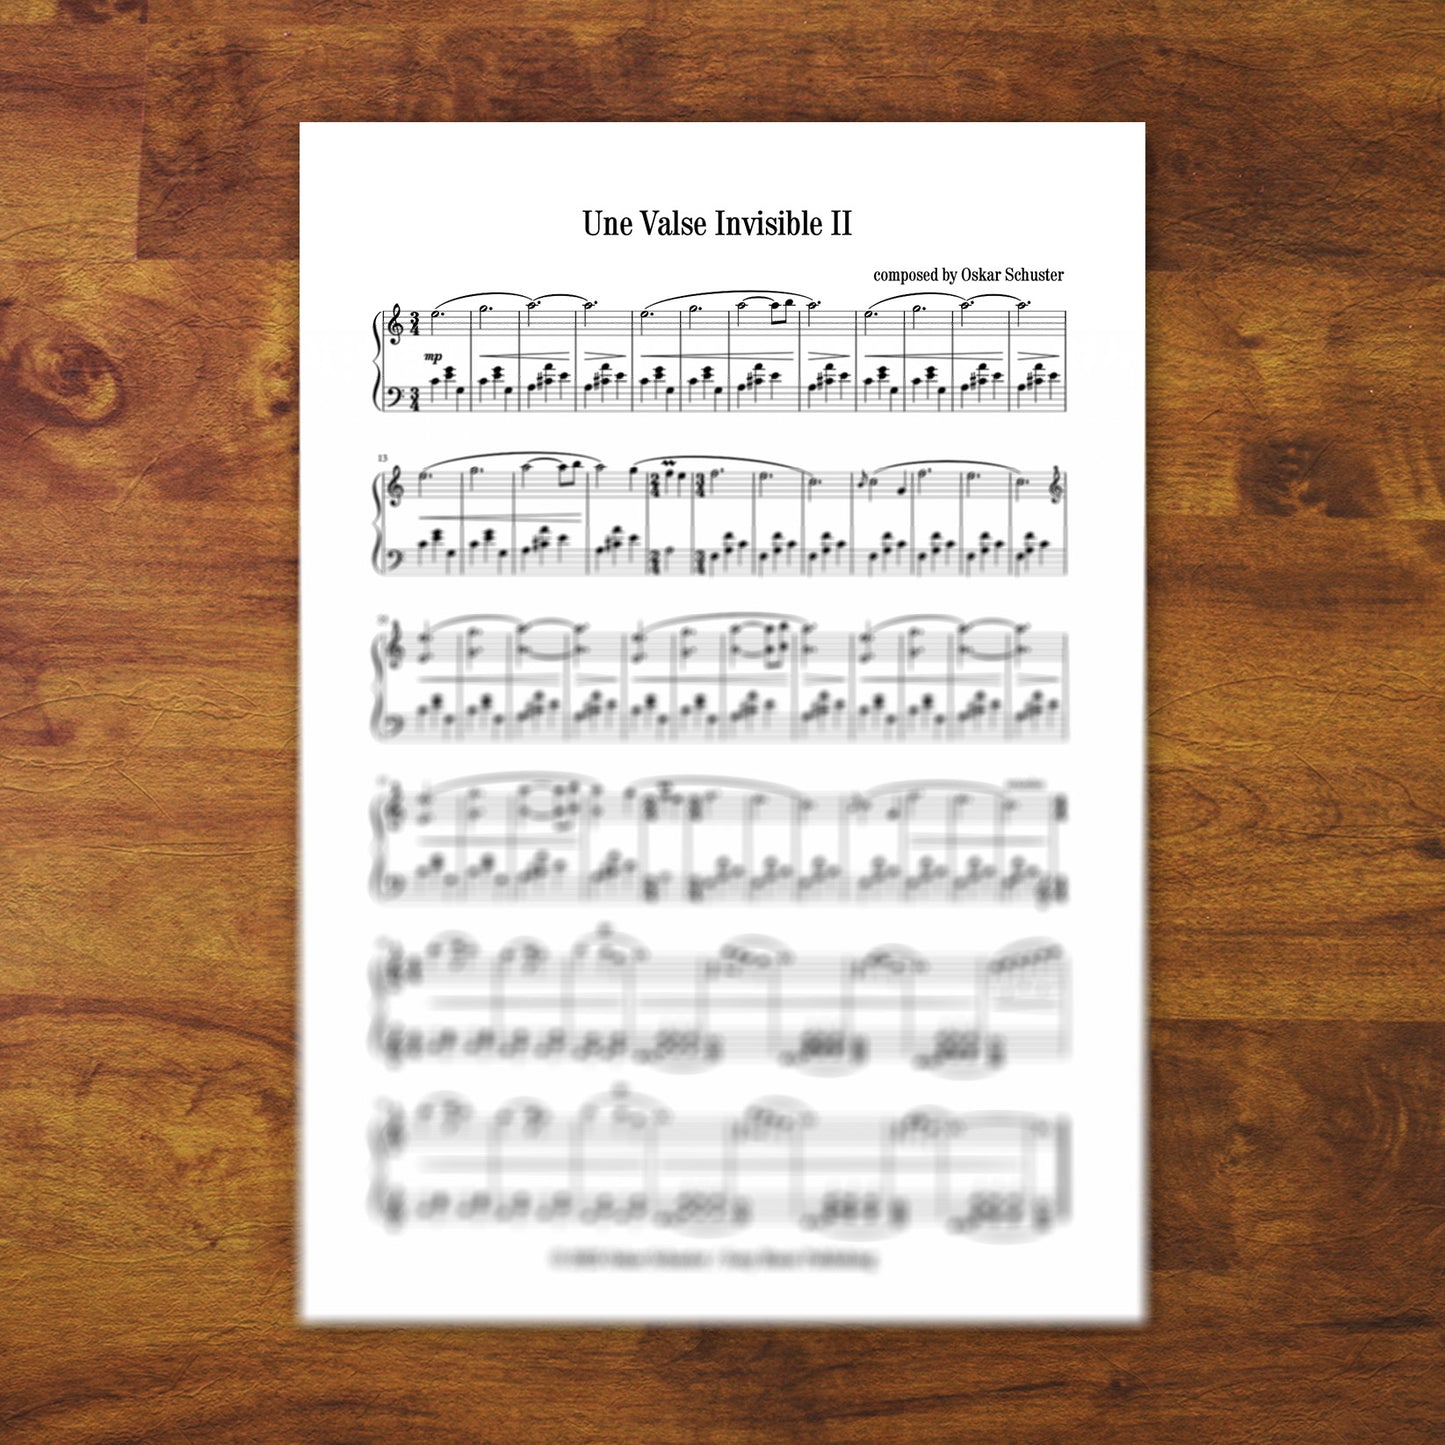 Piano Sheets "Une Valse Invisible II"